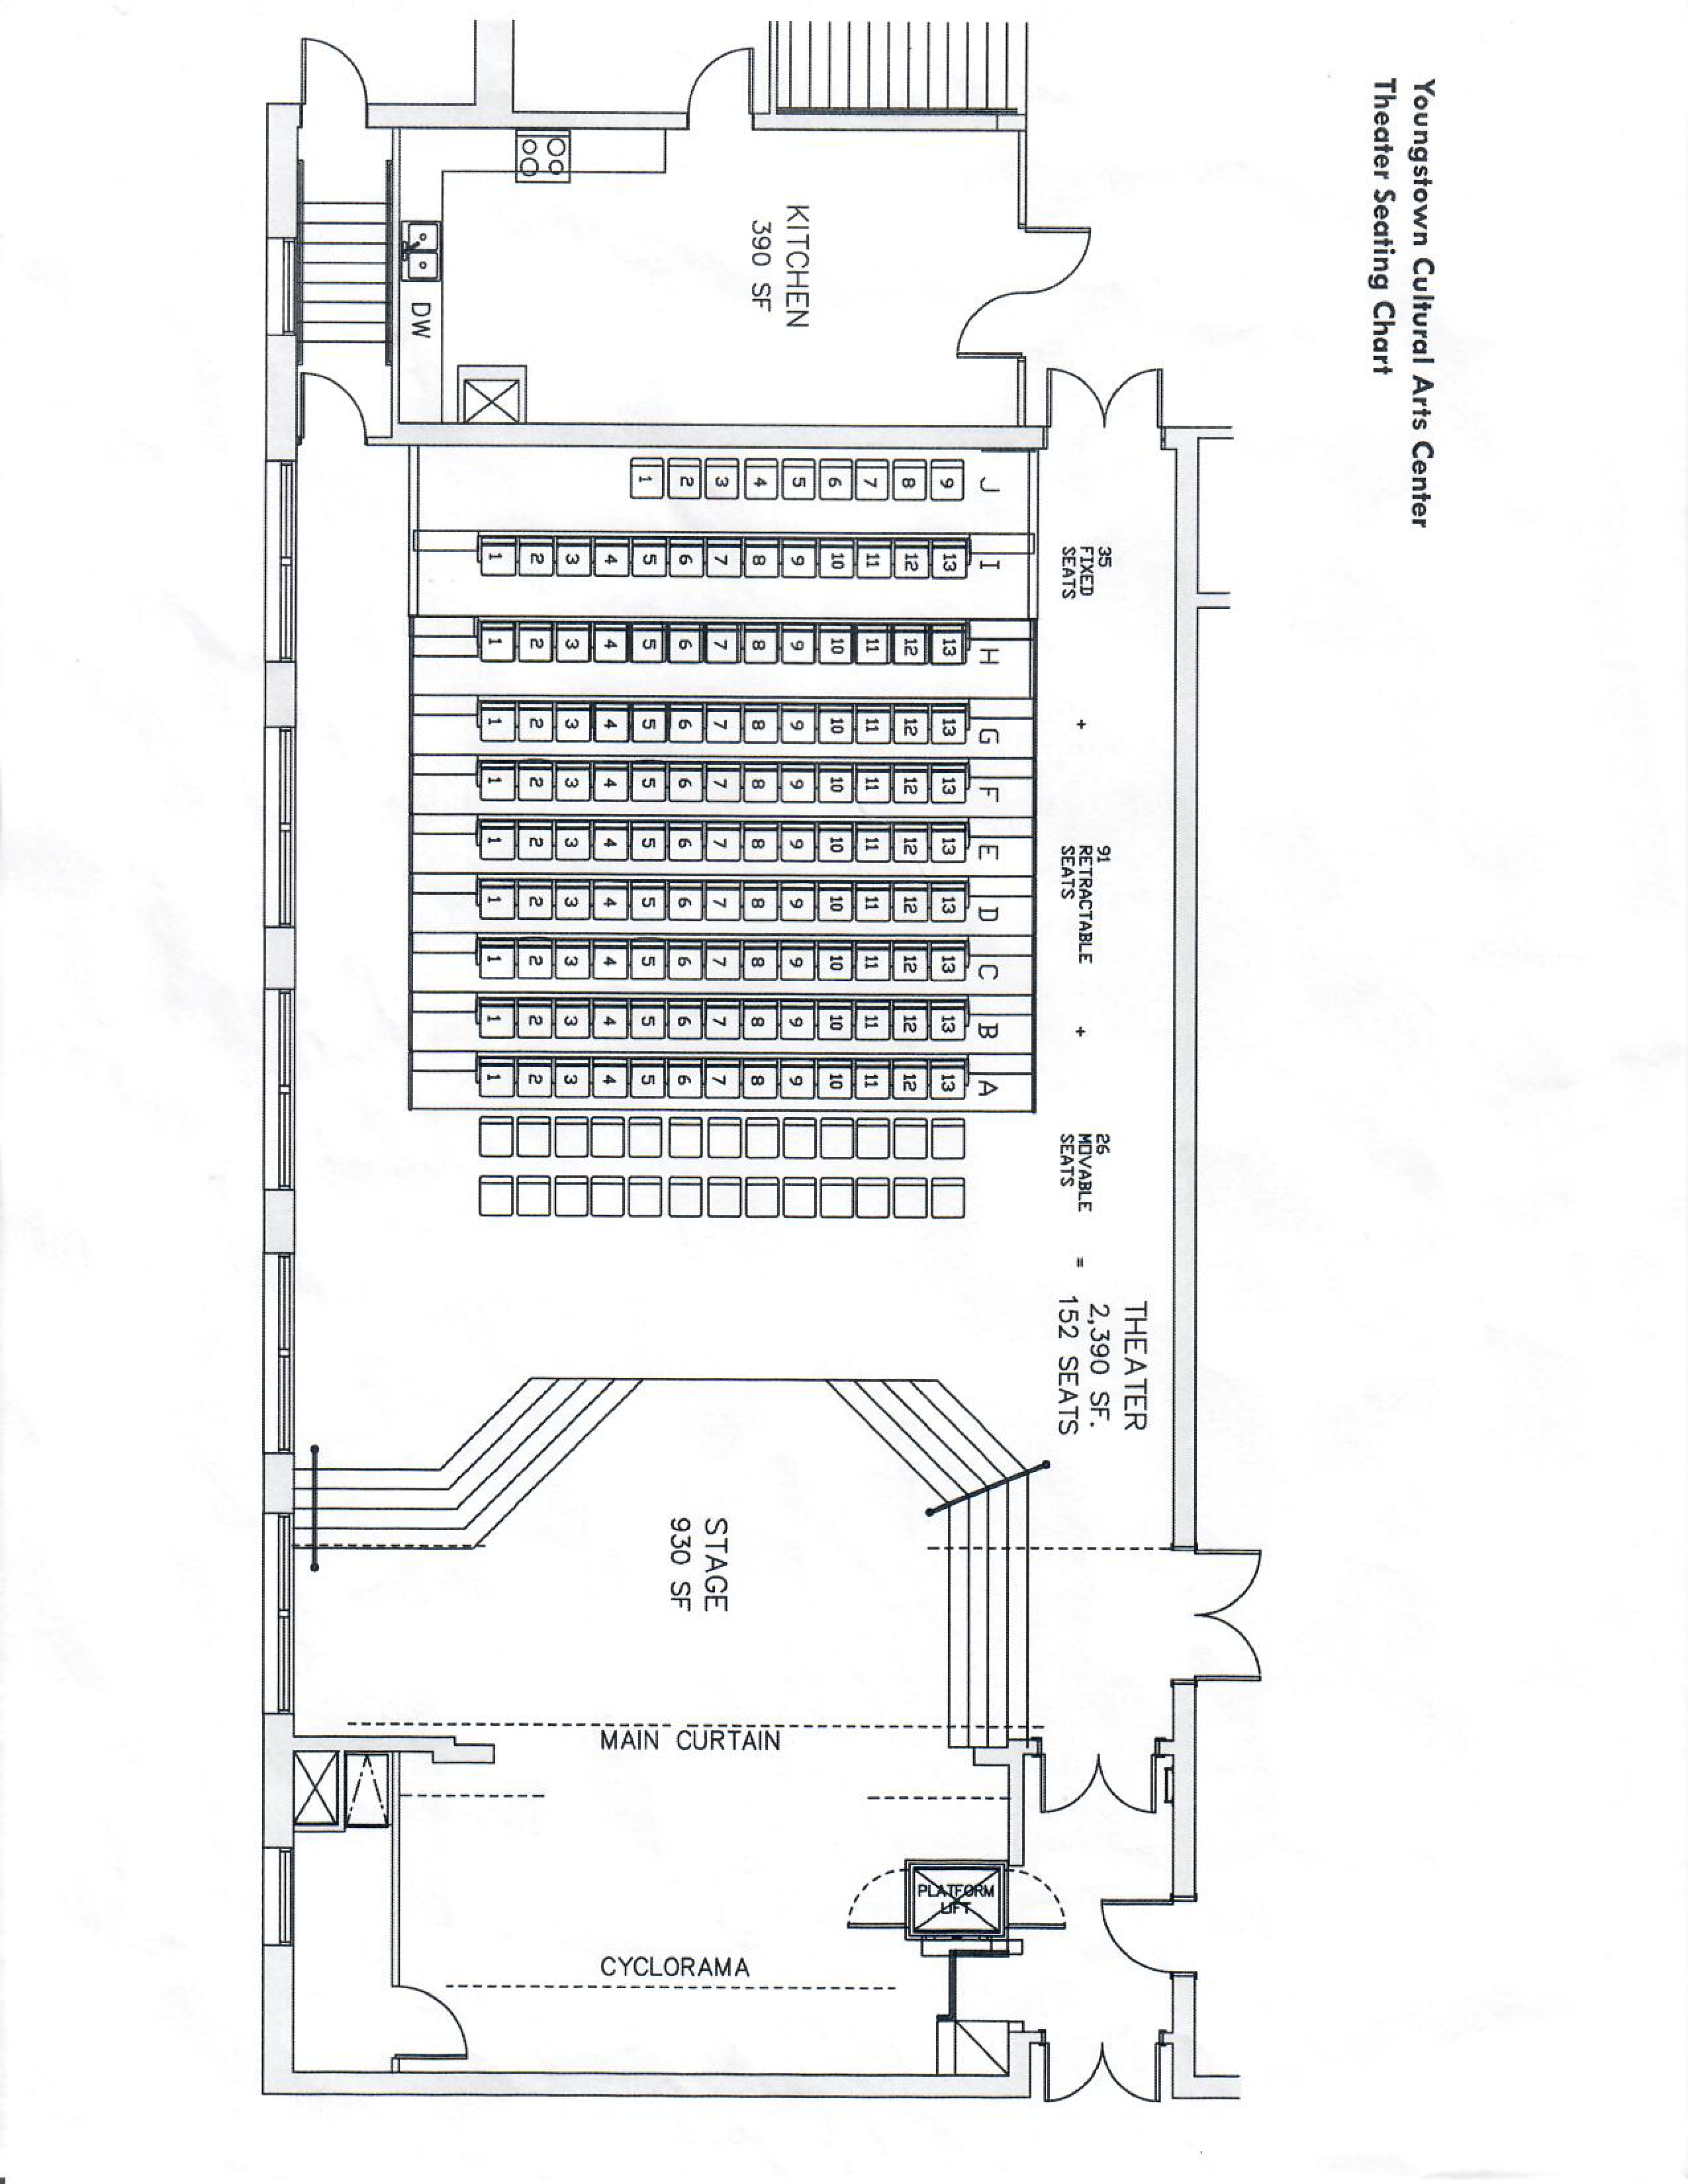 Theatre with Seating Floorplan